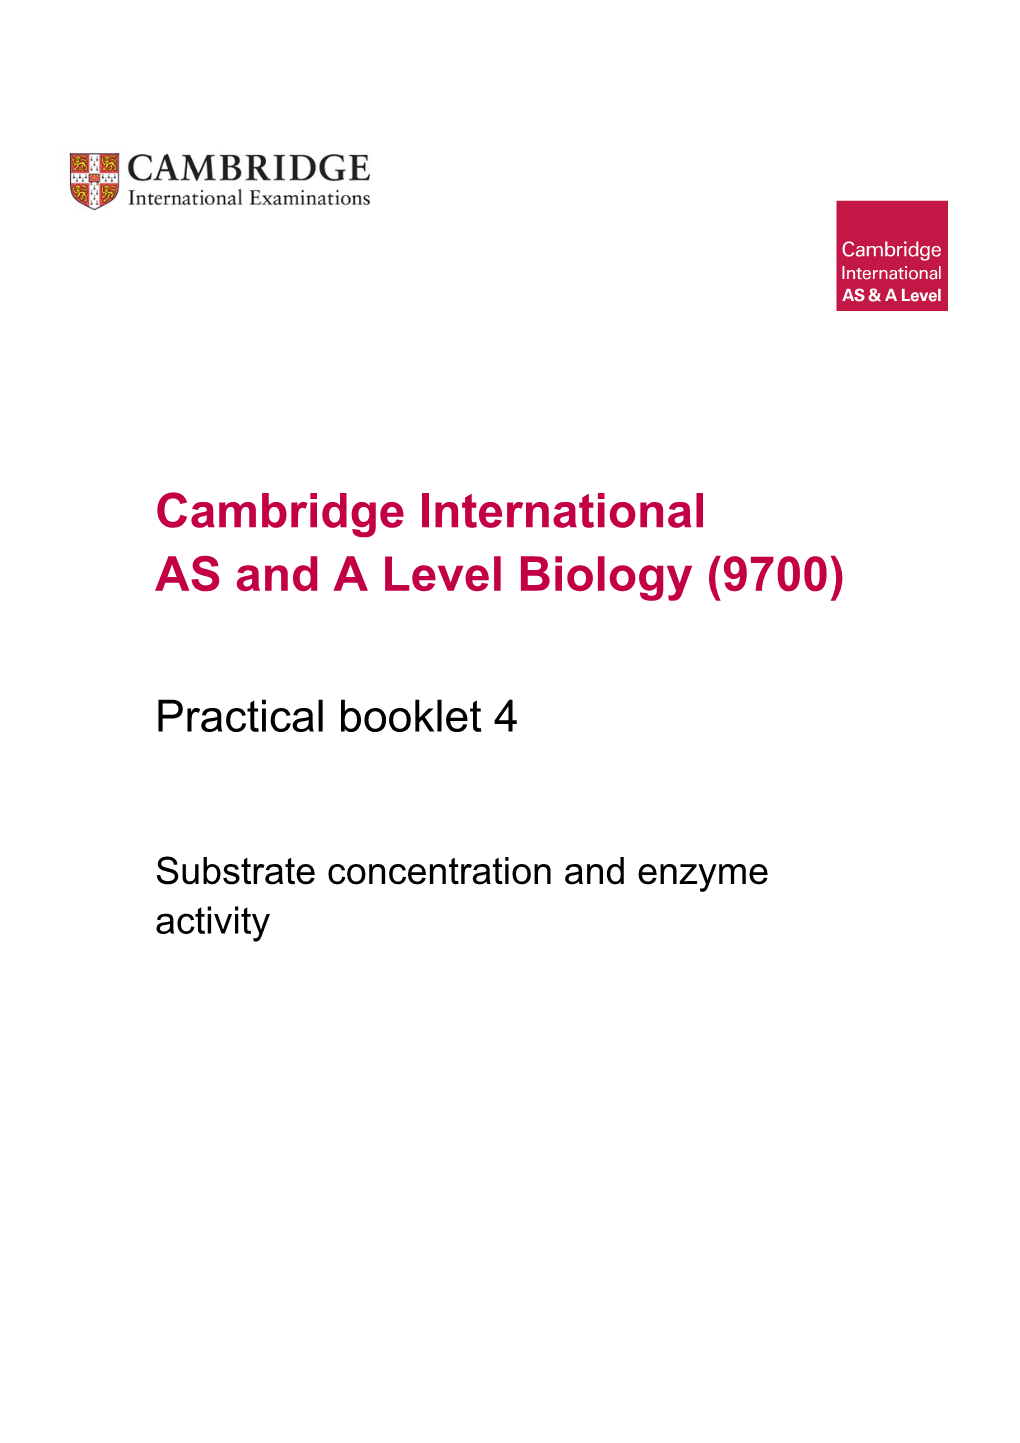 AS and a Levelbiology (9700)